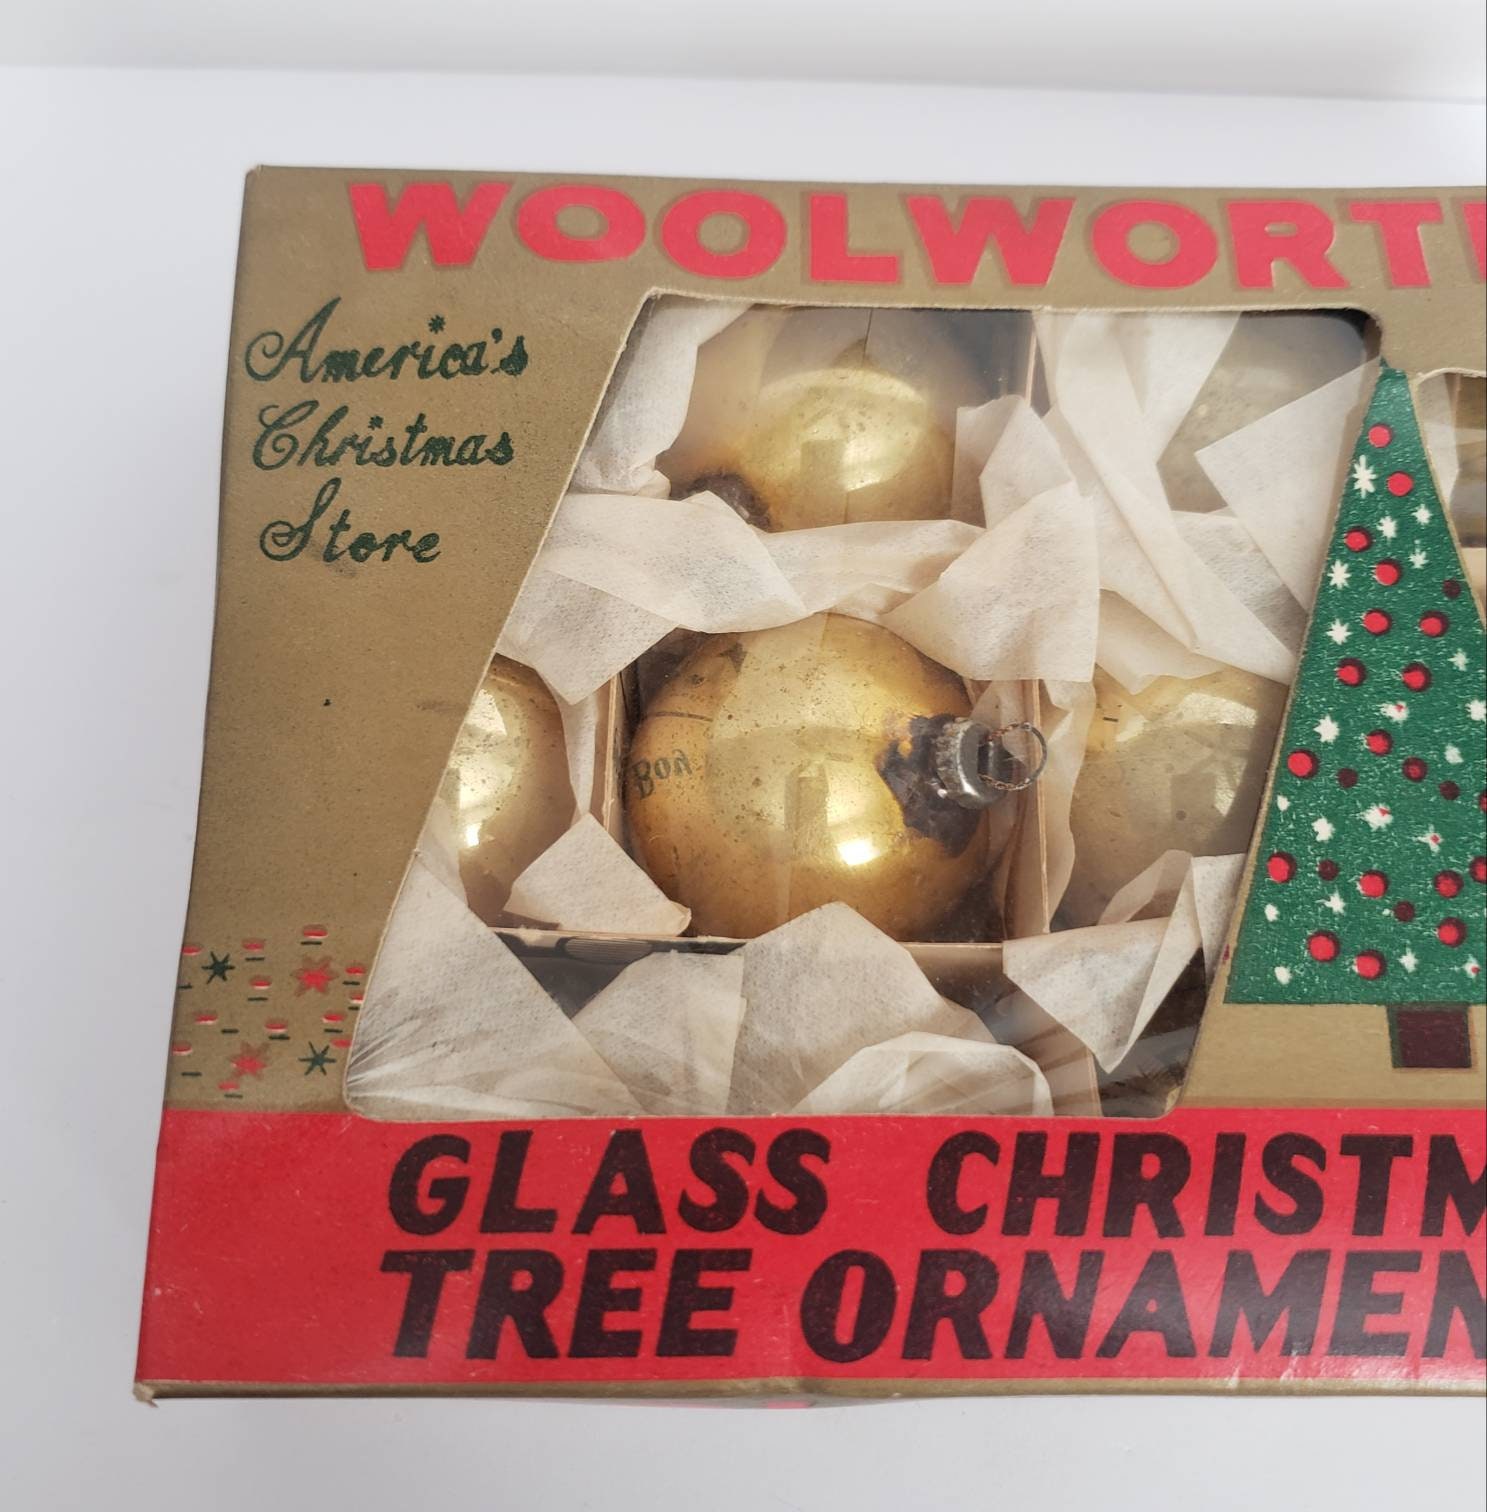 original packages vintage Woolworths tiny Christmas ornaments